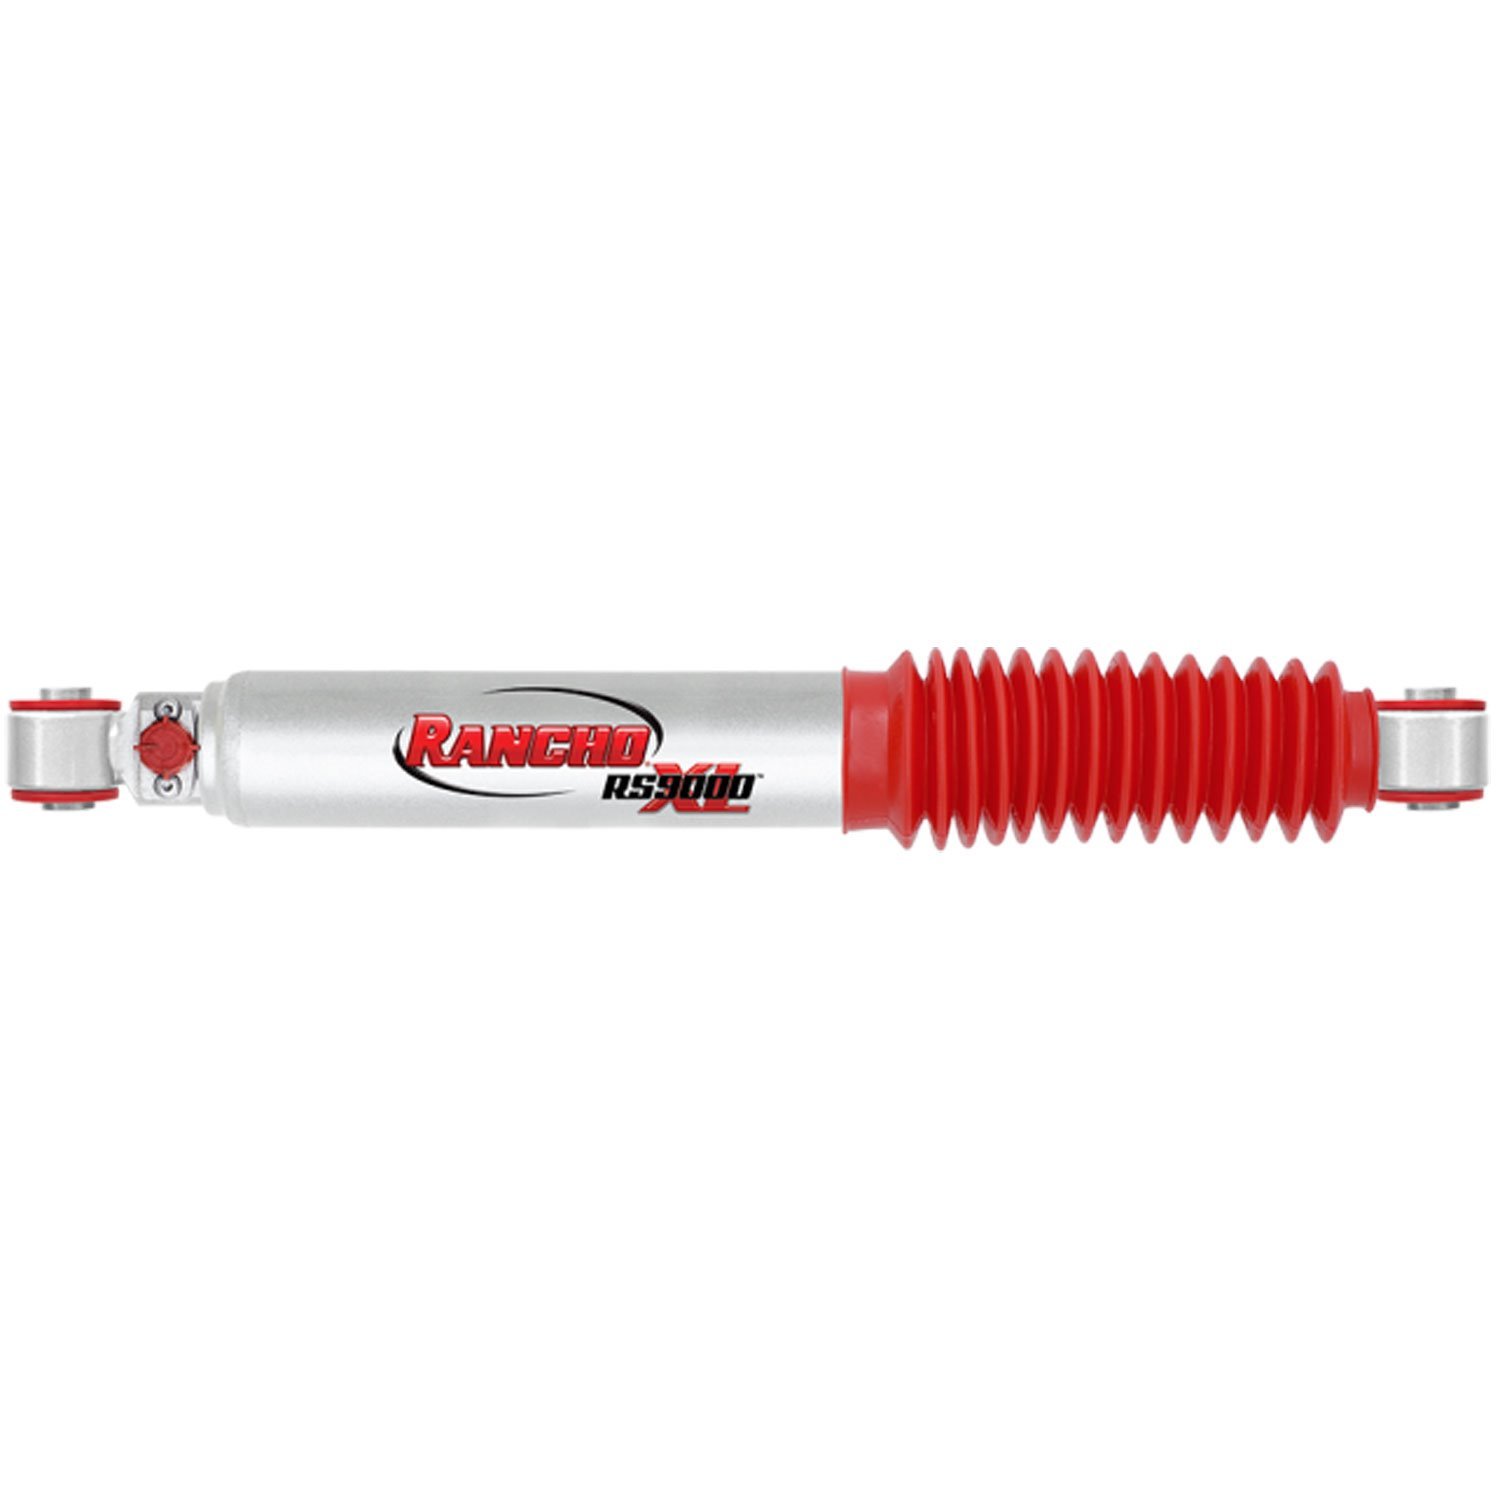 RS9000XL Rear Shock Absorber Fits GM 1500 Pickups and Dodge Ram 1500 Pickups